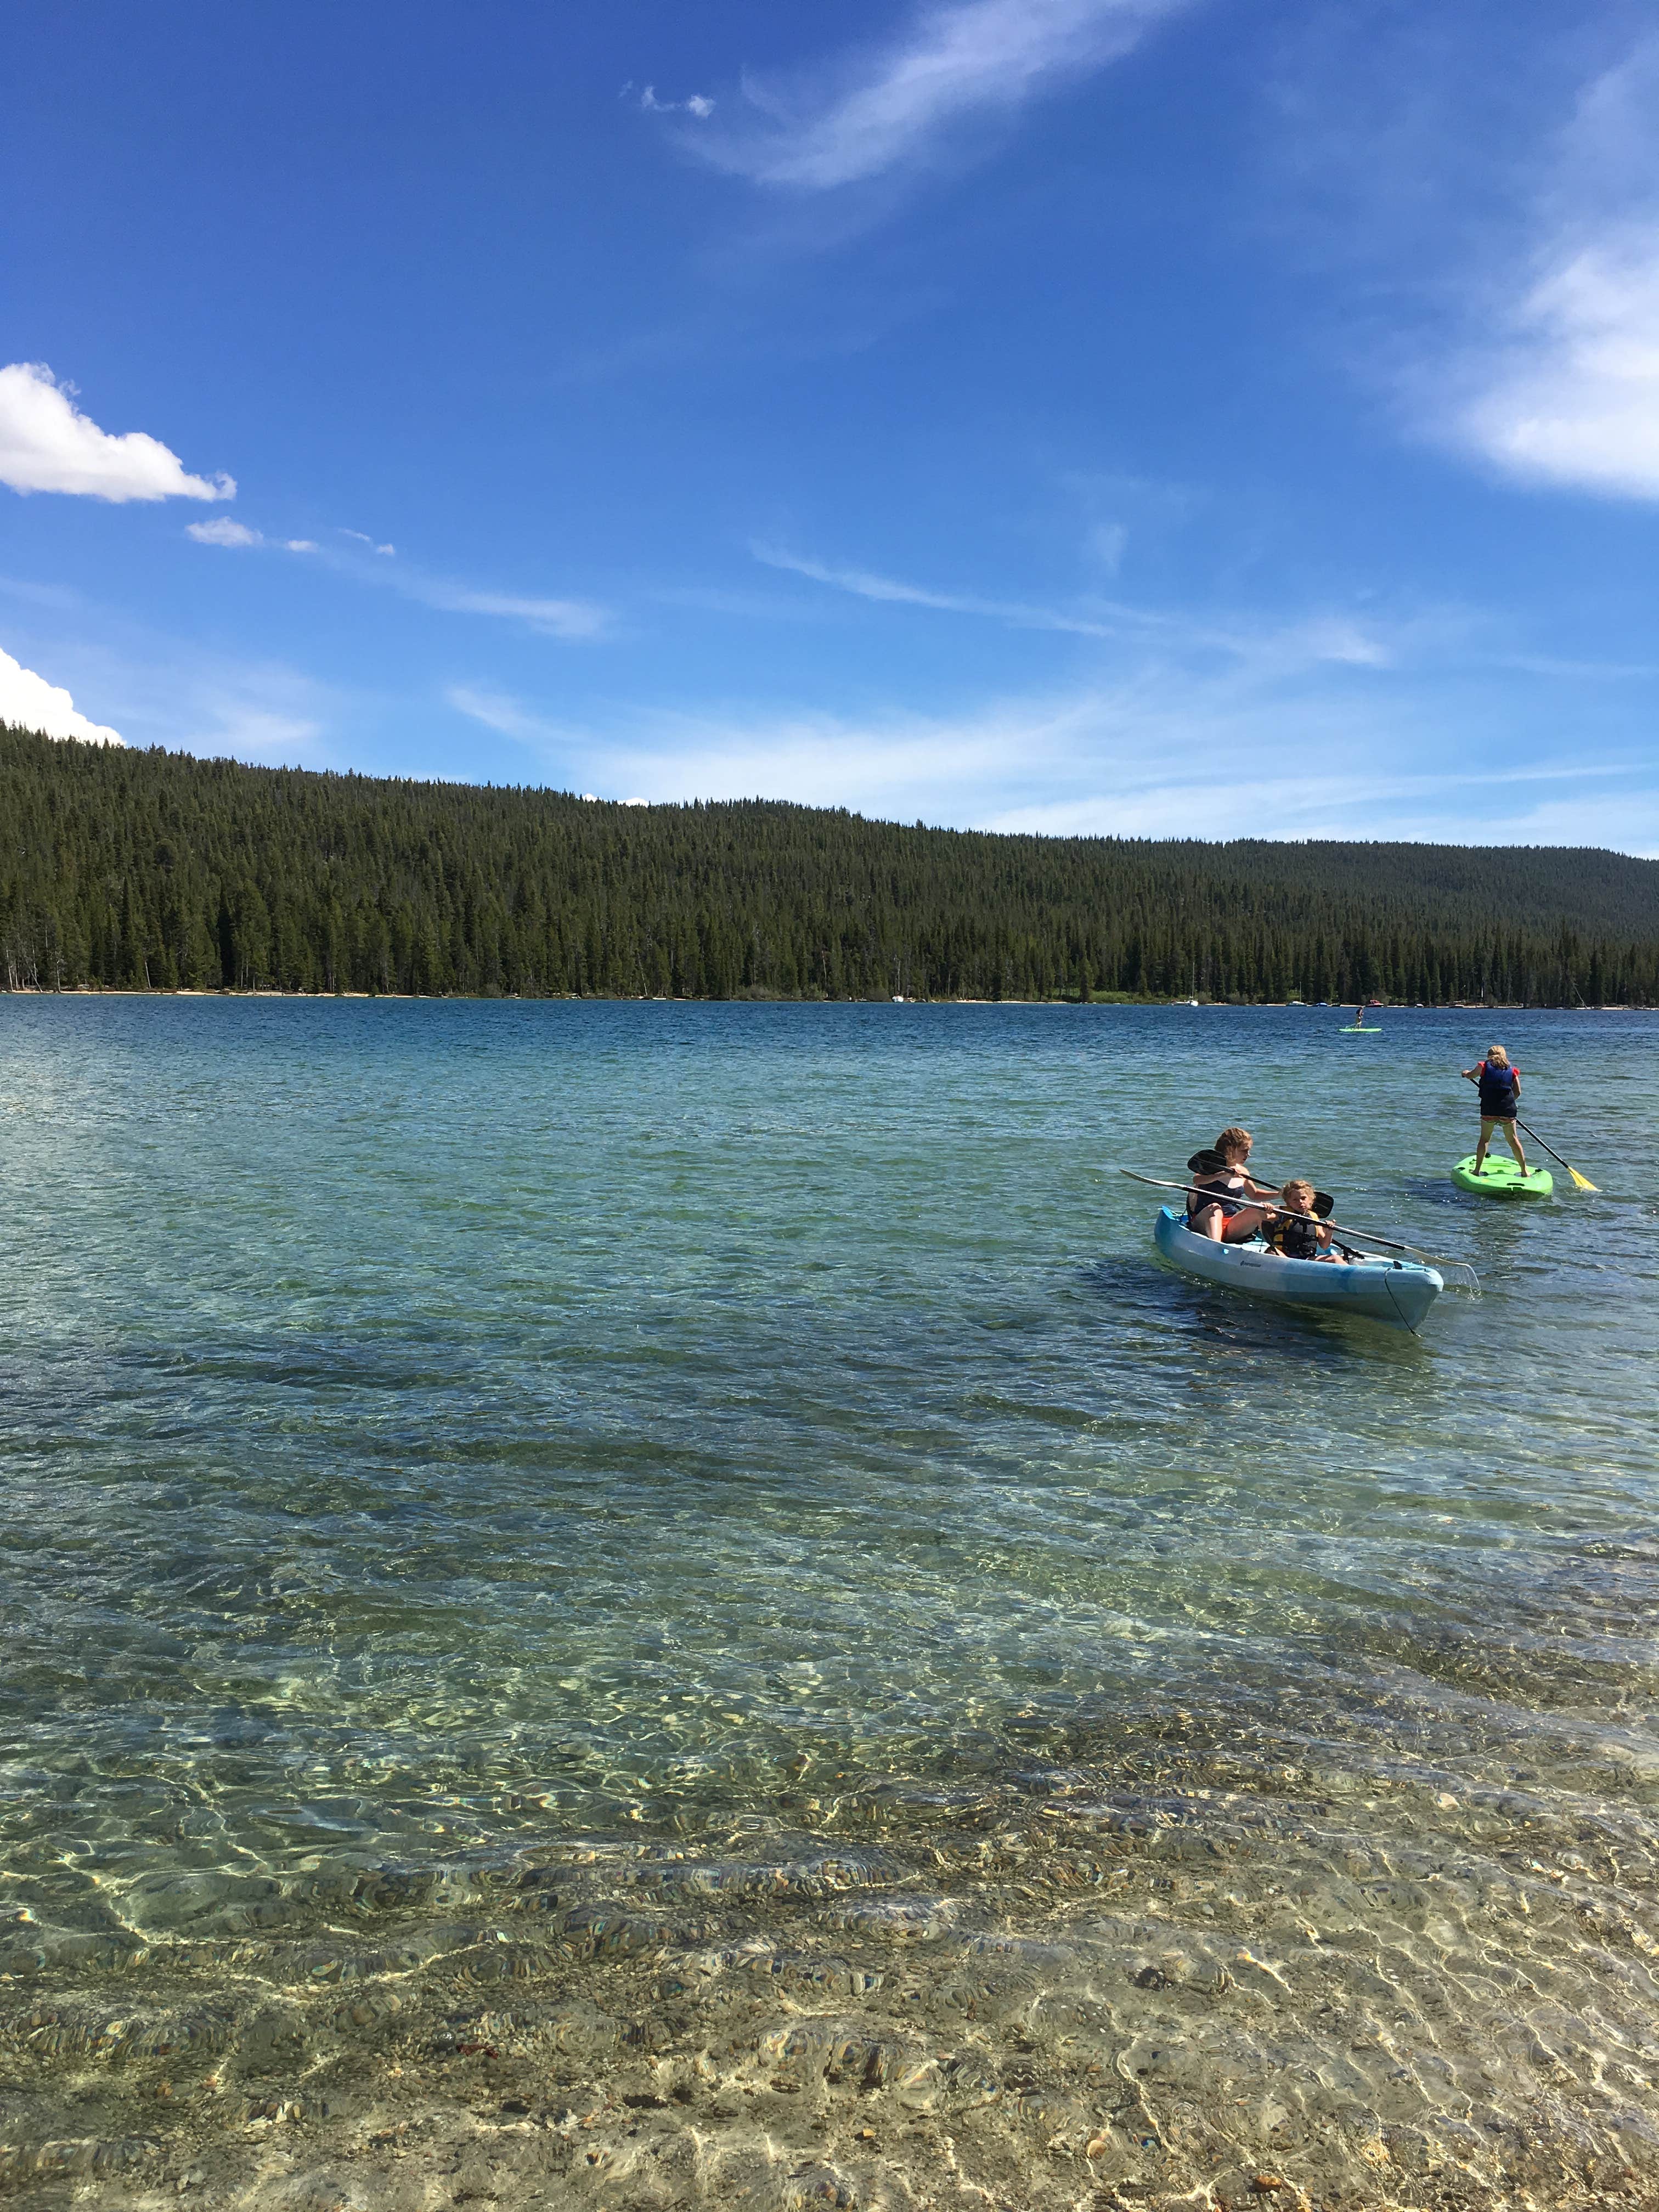 Super clear water in Redfish Lake